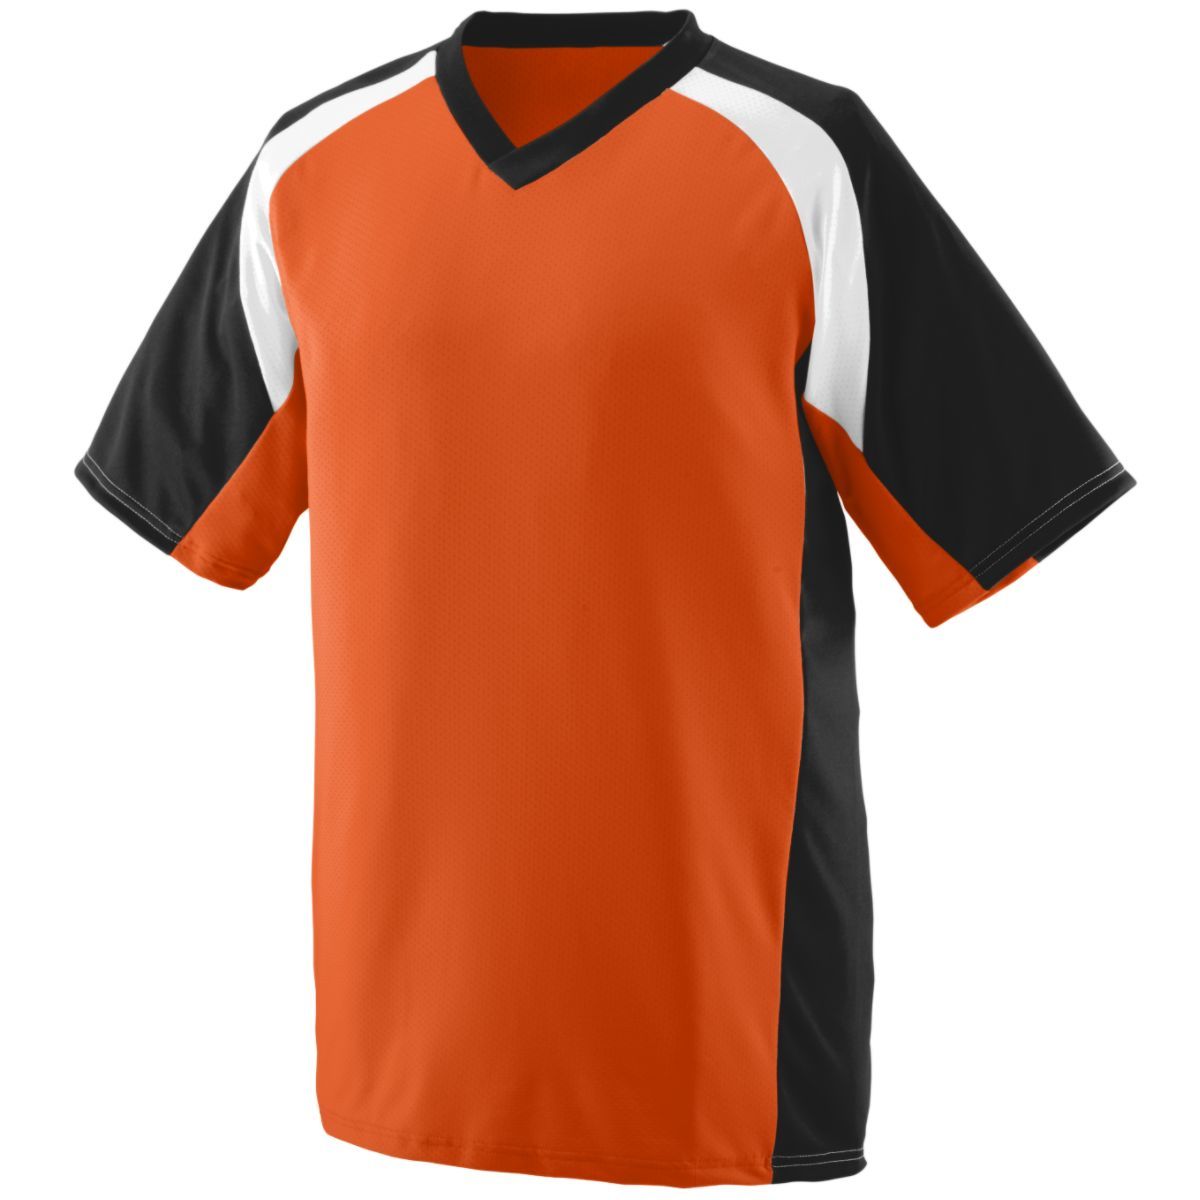 Augusta Sportswear Youth Nitro Jersey in Orange/Black/White  -Part of the Youth, Youth-Jersey, Augusta-Products, Football, Shirts, All-Sports, All-Sports-1 product lines at KanaleyCreations.com